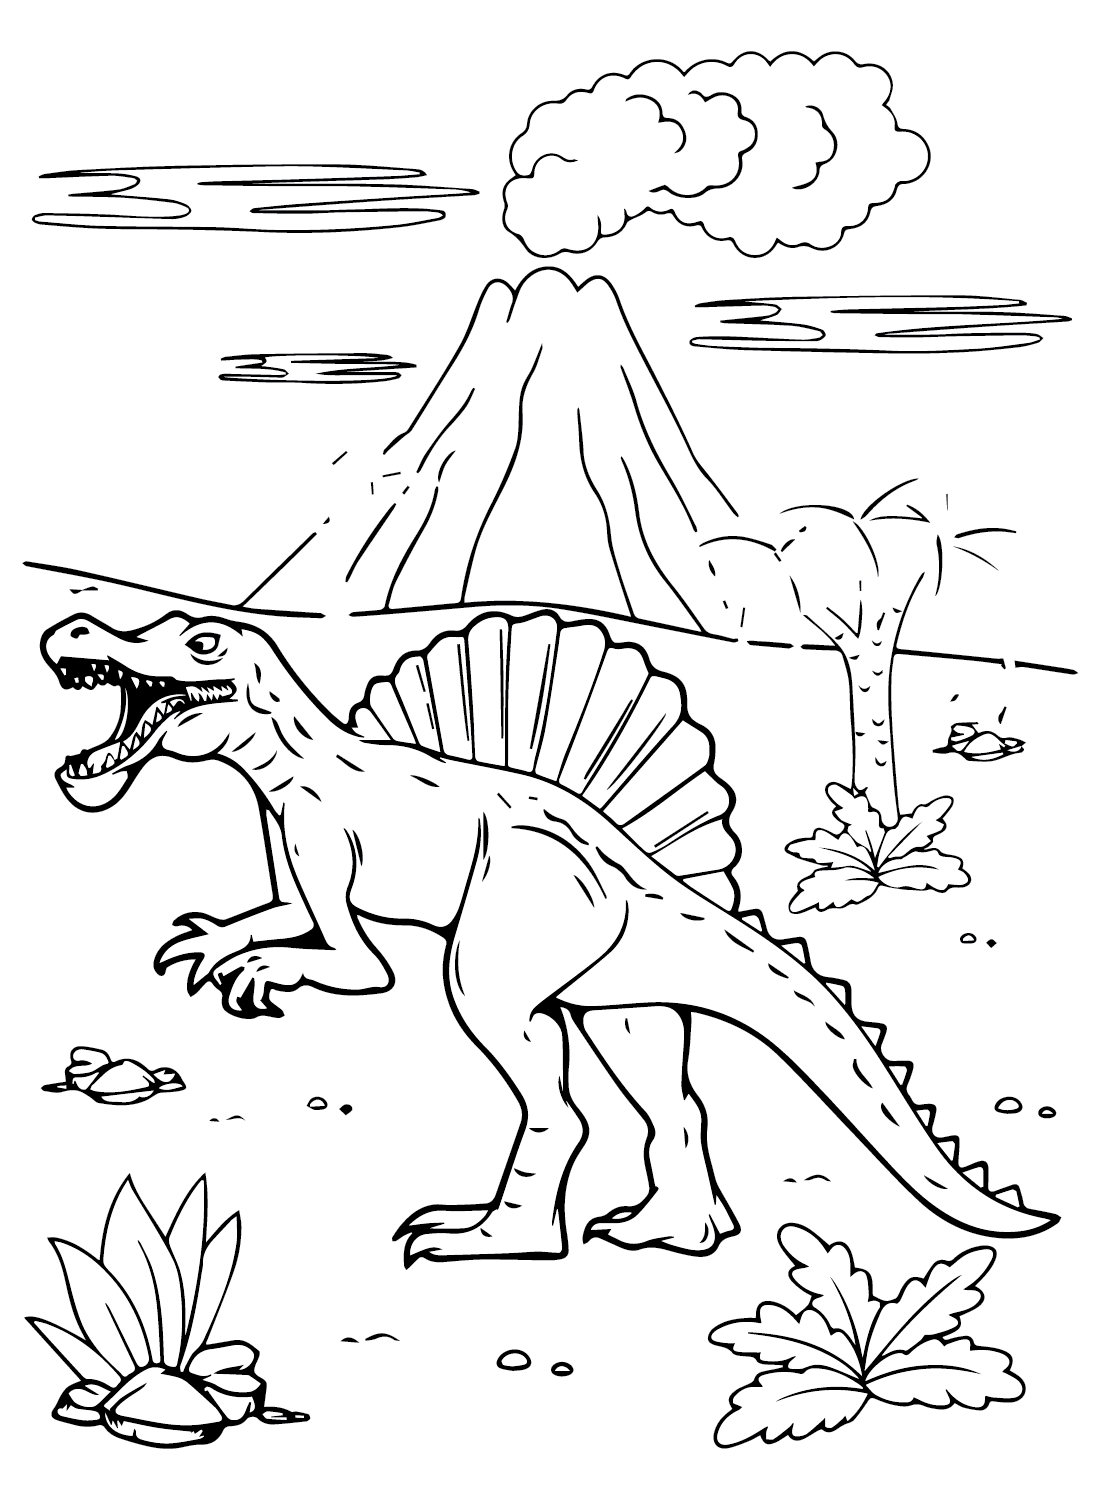 Spinosaurus Aegyptiacus Coloring Pages to Download from Spinosaurus Aegyptiacus